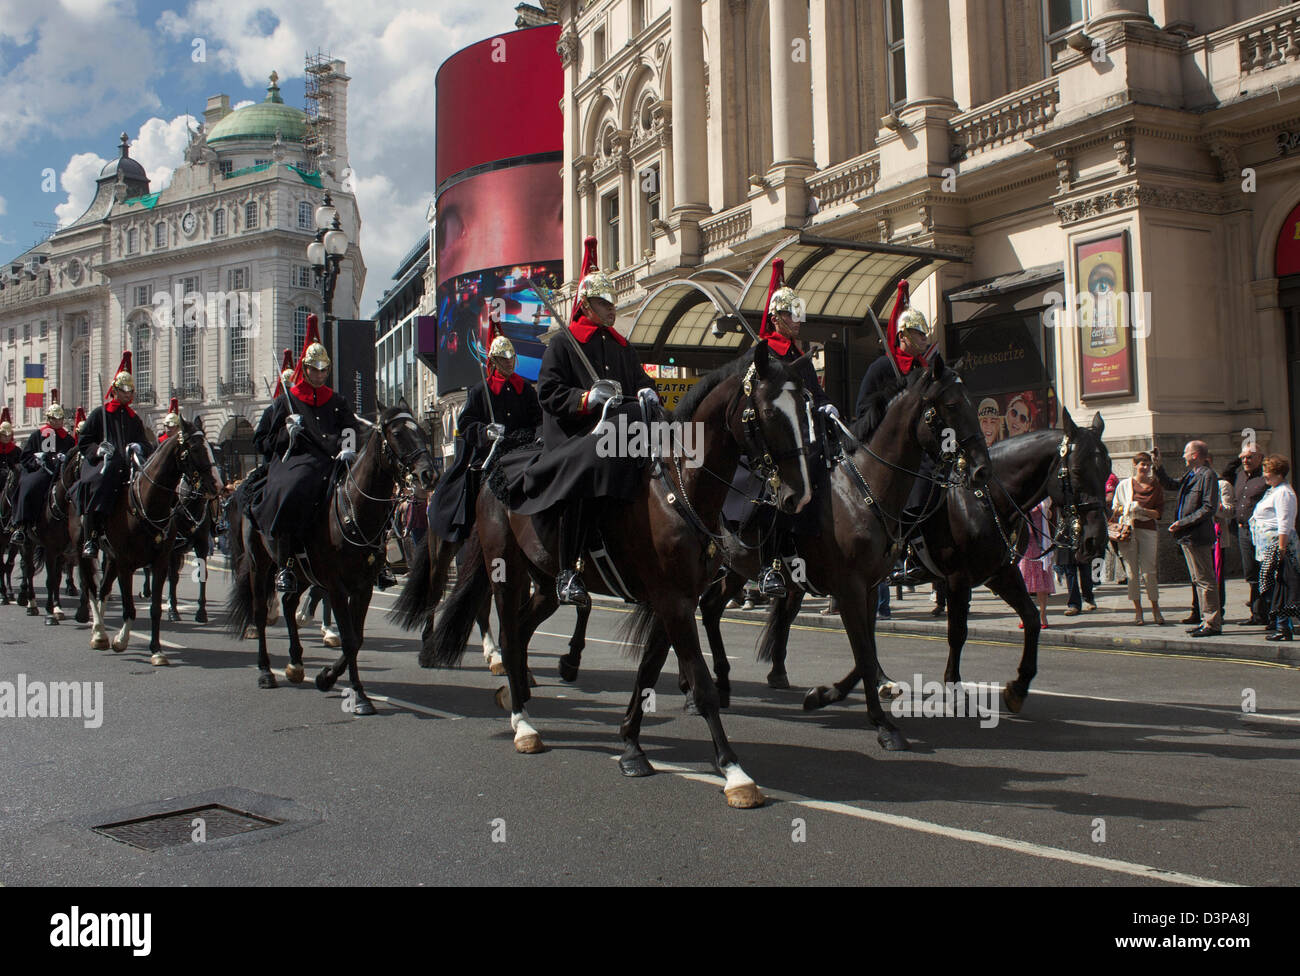 Die Horse Guard Kavallerie paradieren durch Piccadilly Circus, London, England Stockfoto